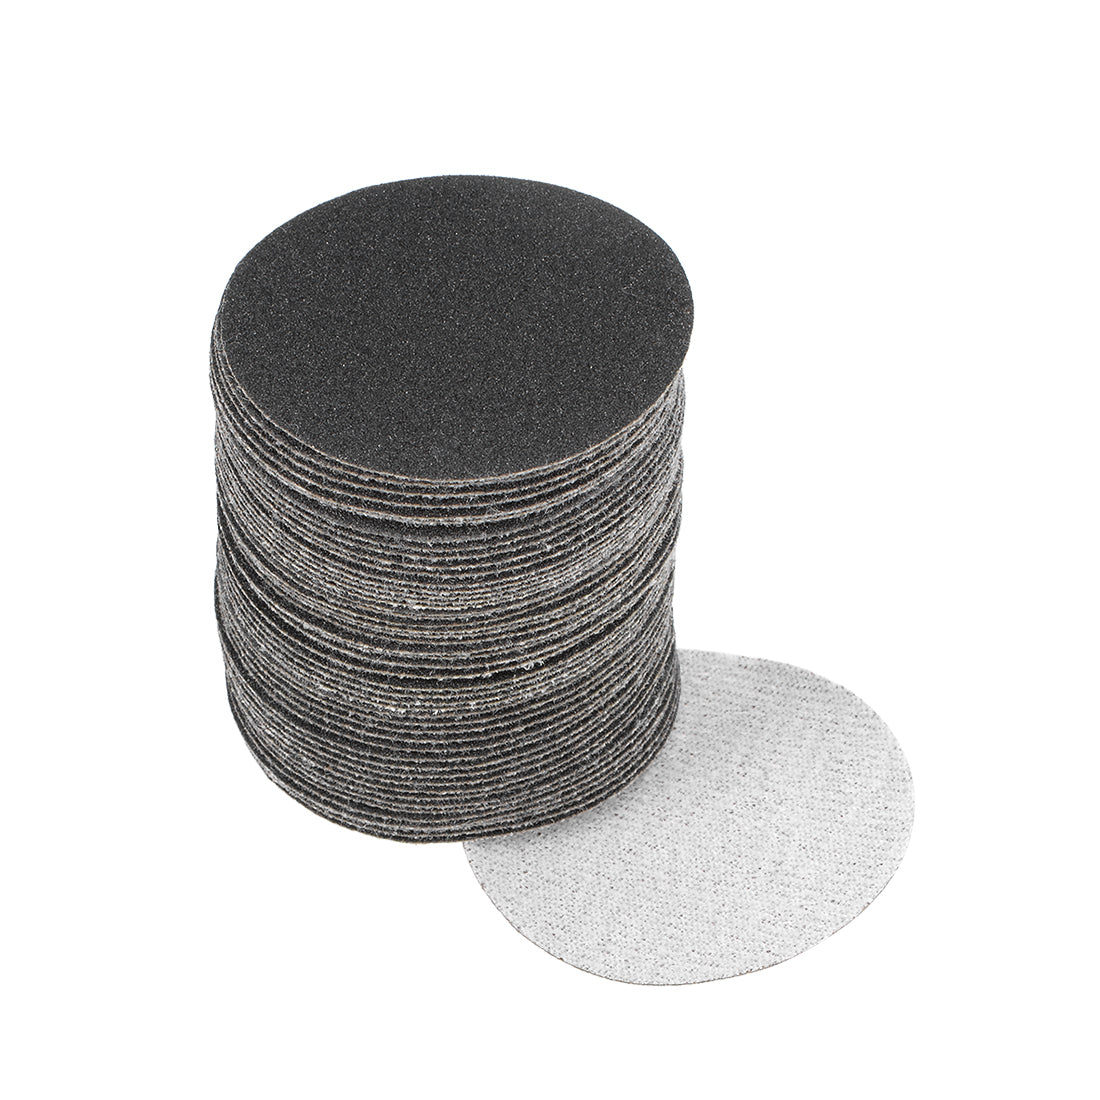 uxcell Uxcell Hook and Loop Sanding Pads Tool Disc Wet Dry Silicon Carbide